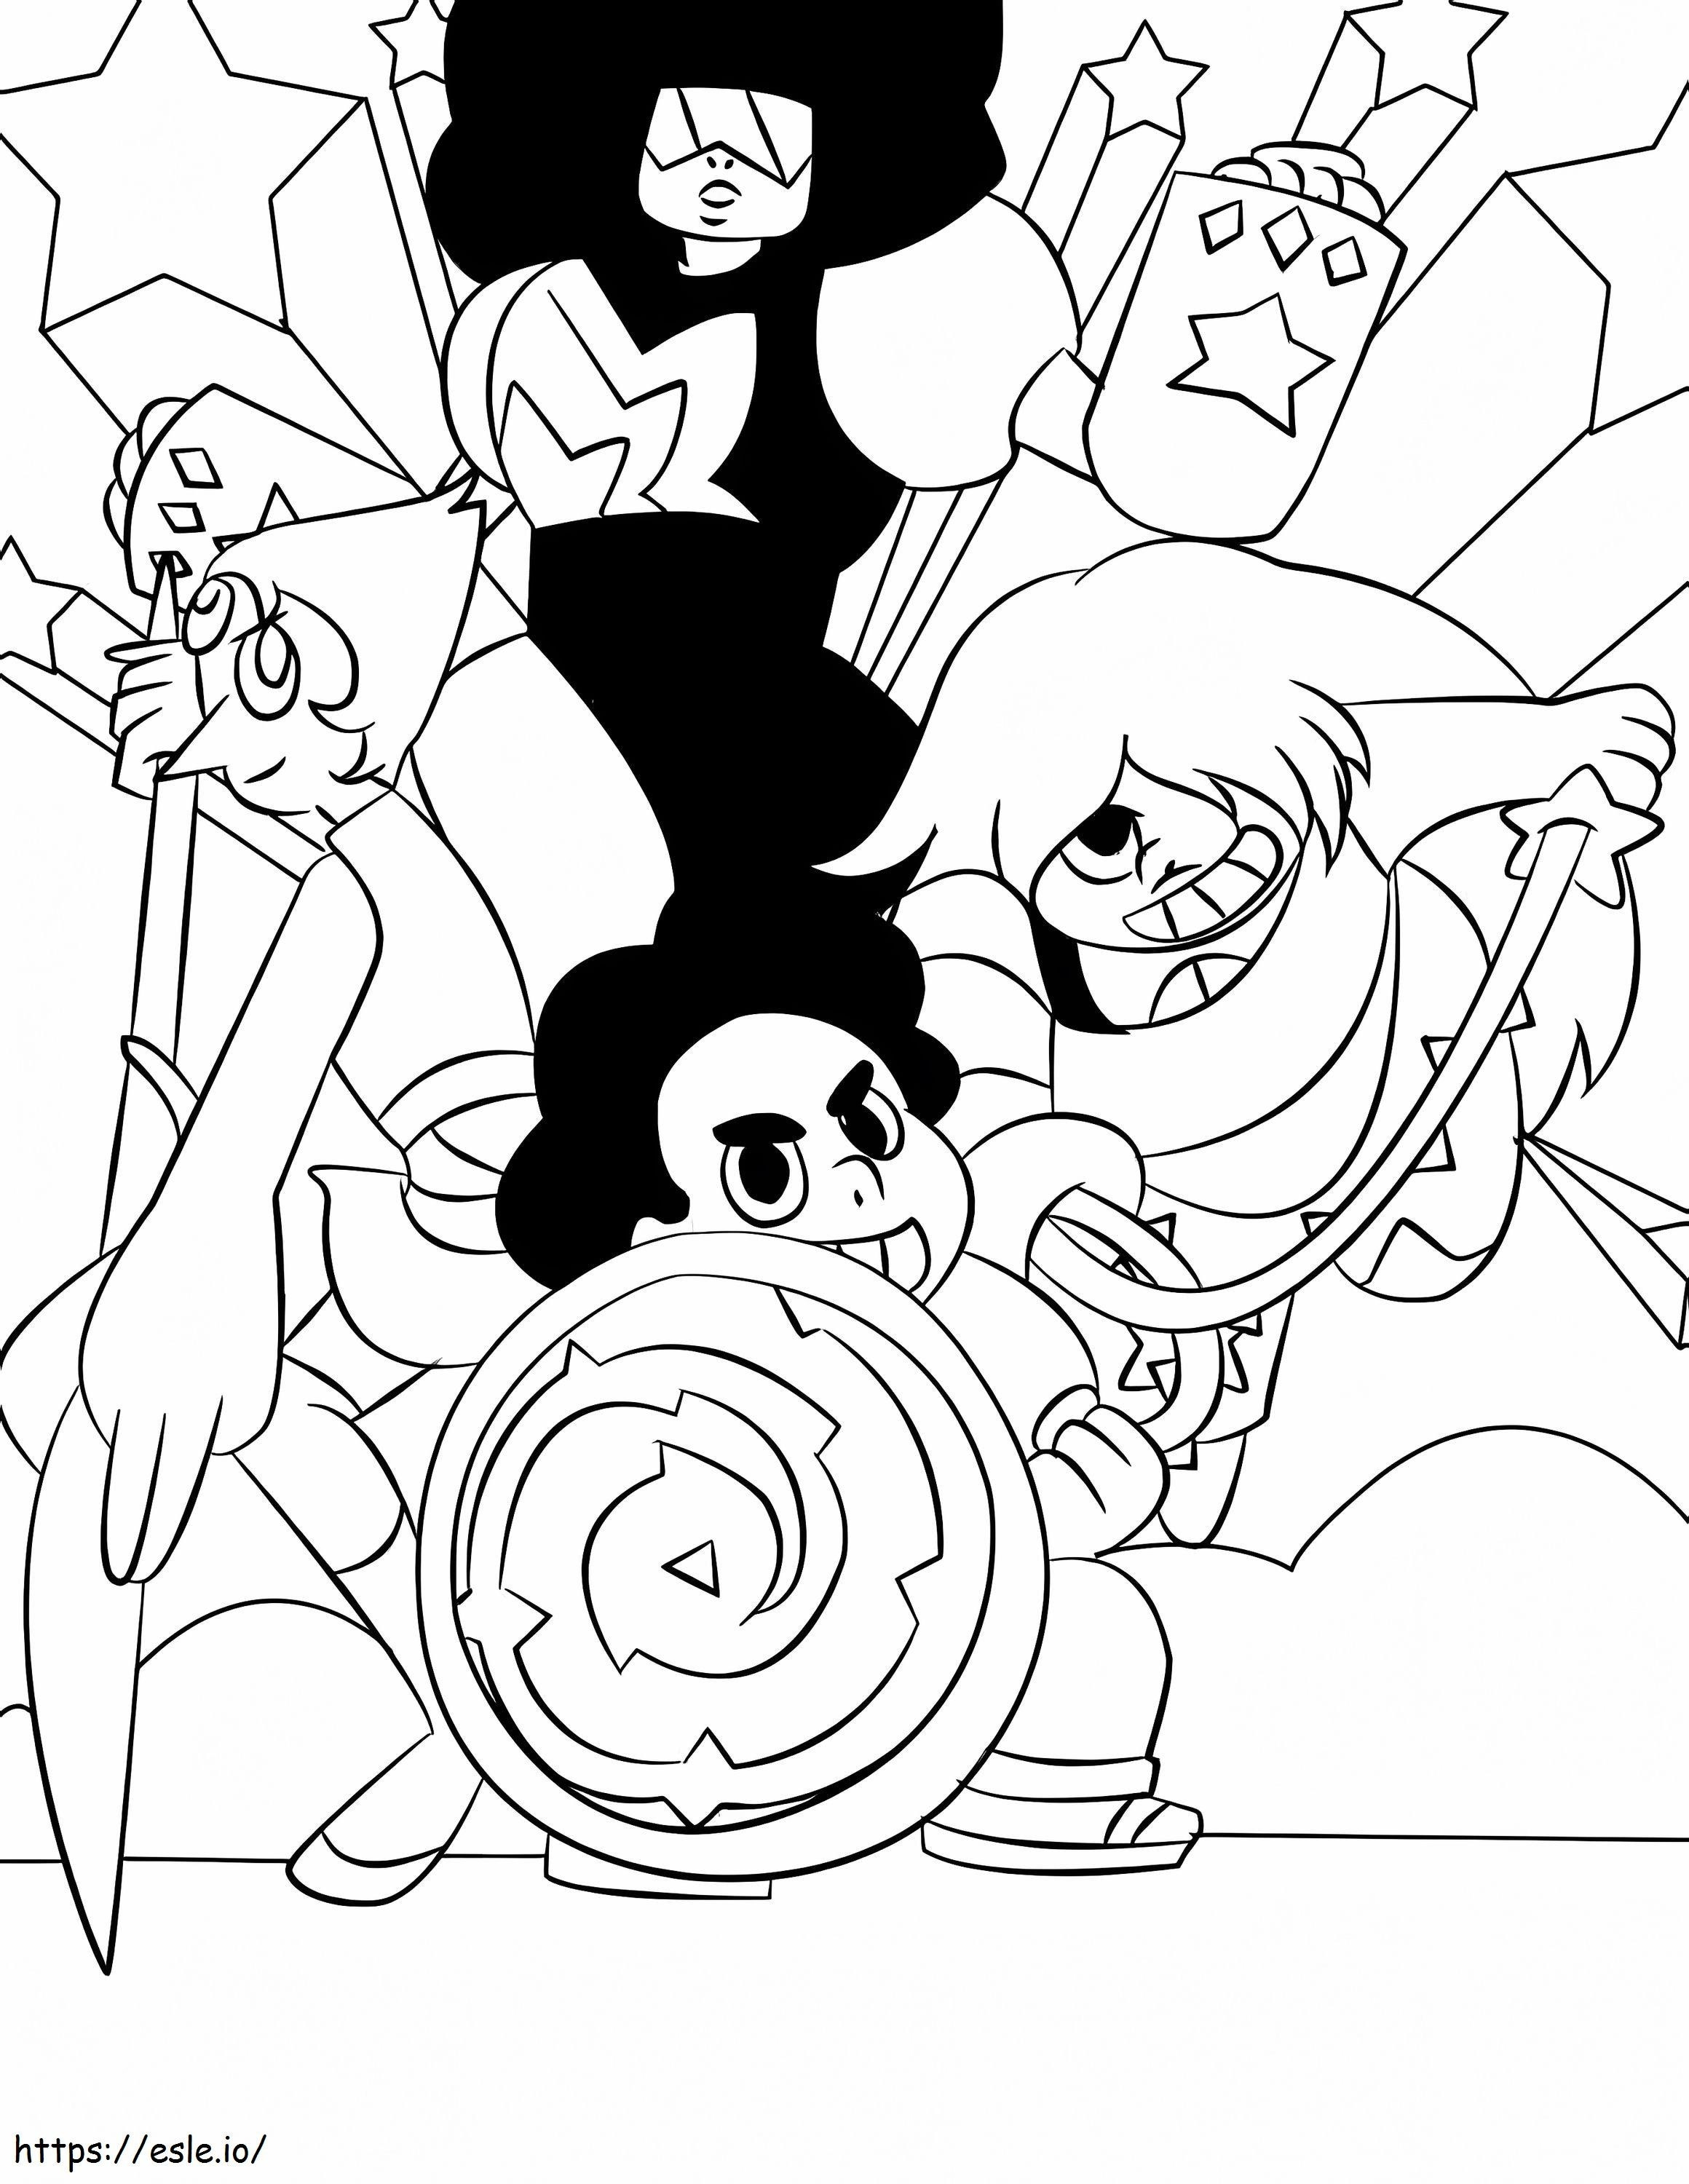 Great Steven And Teams coloring page